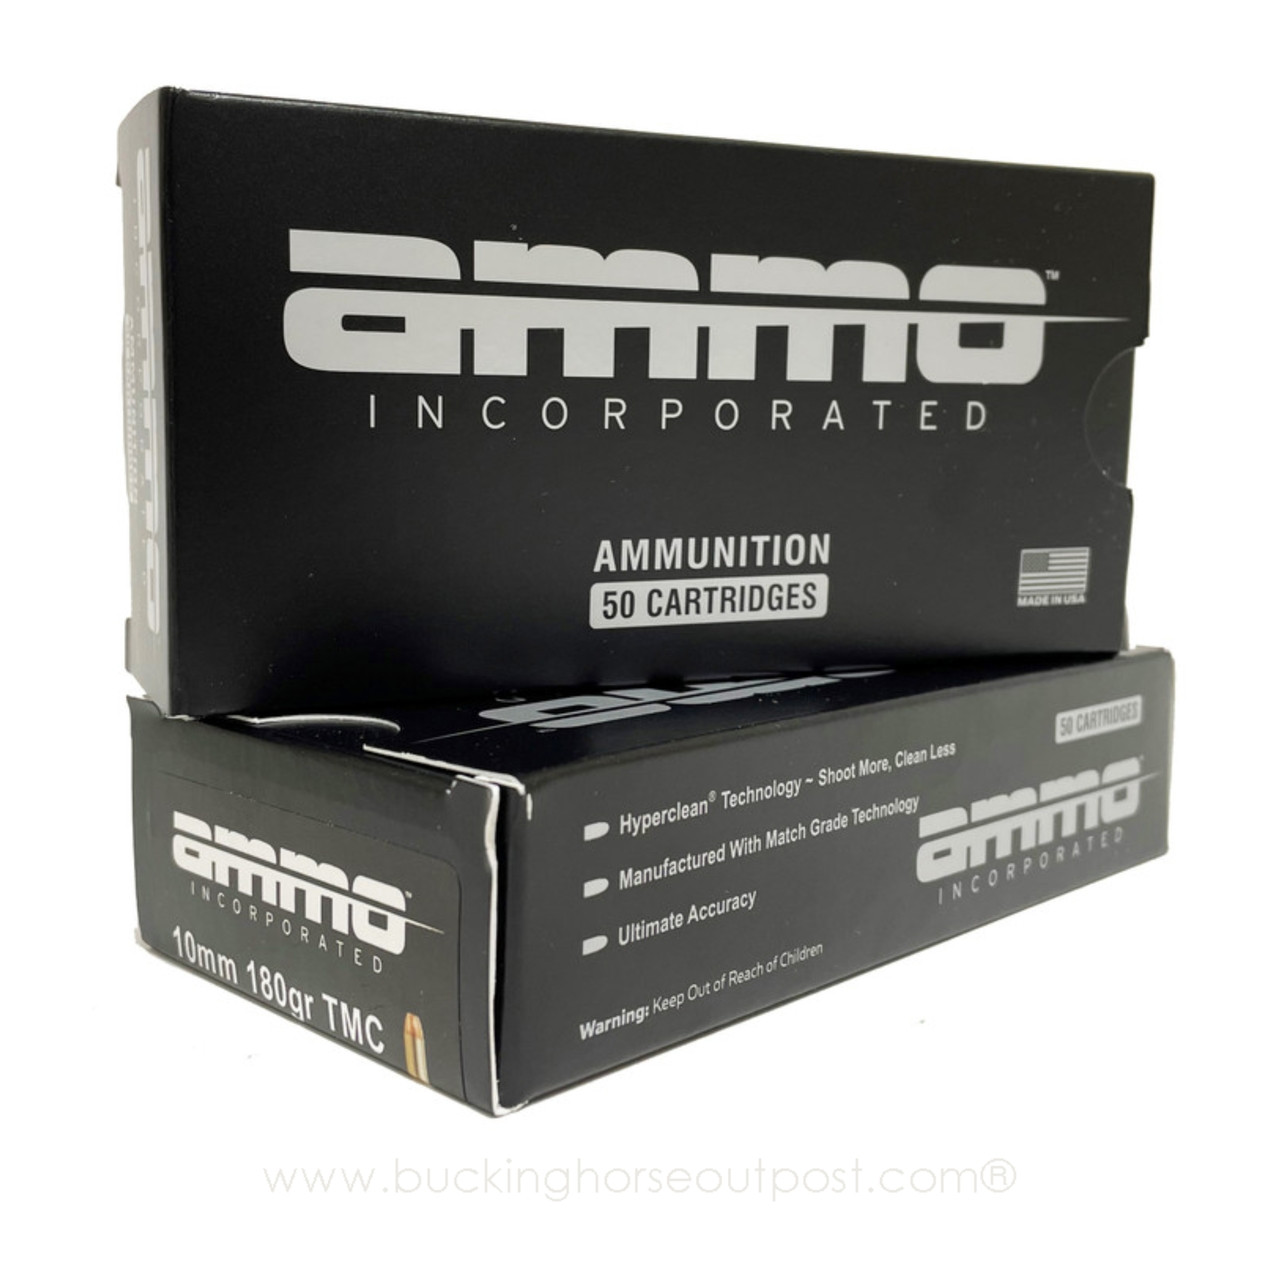 Ammo Inc. Signature 10mm Auto 180 Grain Total Metal Coating 50rds Per Box (30057)- FREE SHIPPING ON ORDERS OVER $175